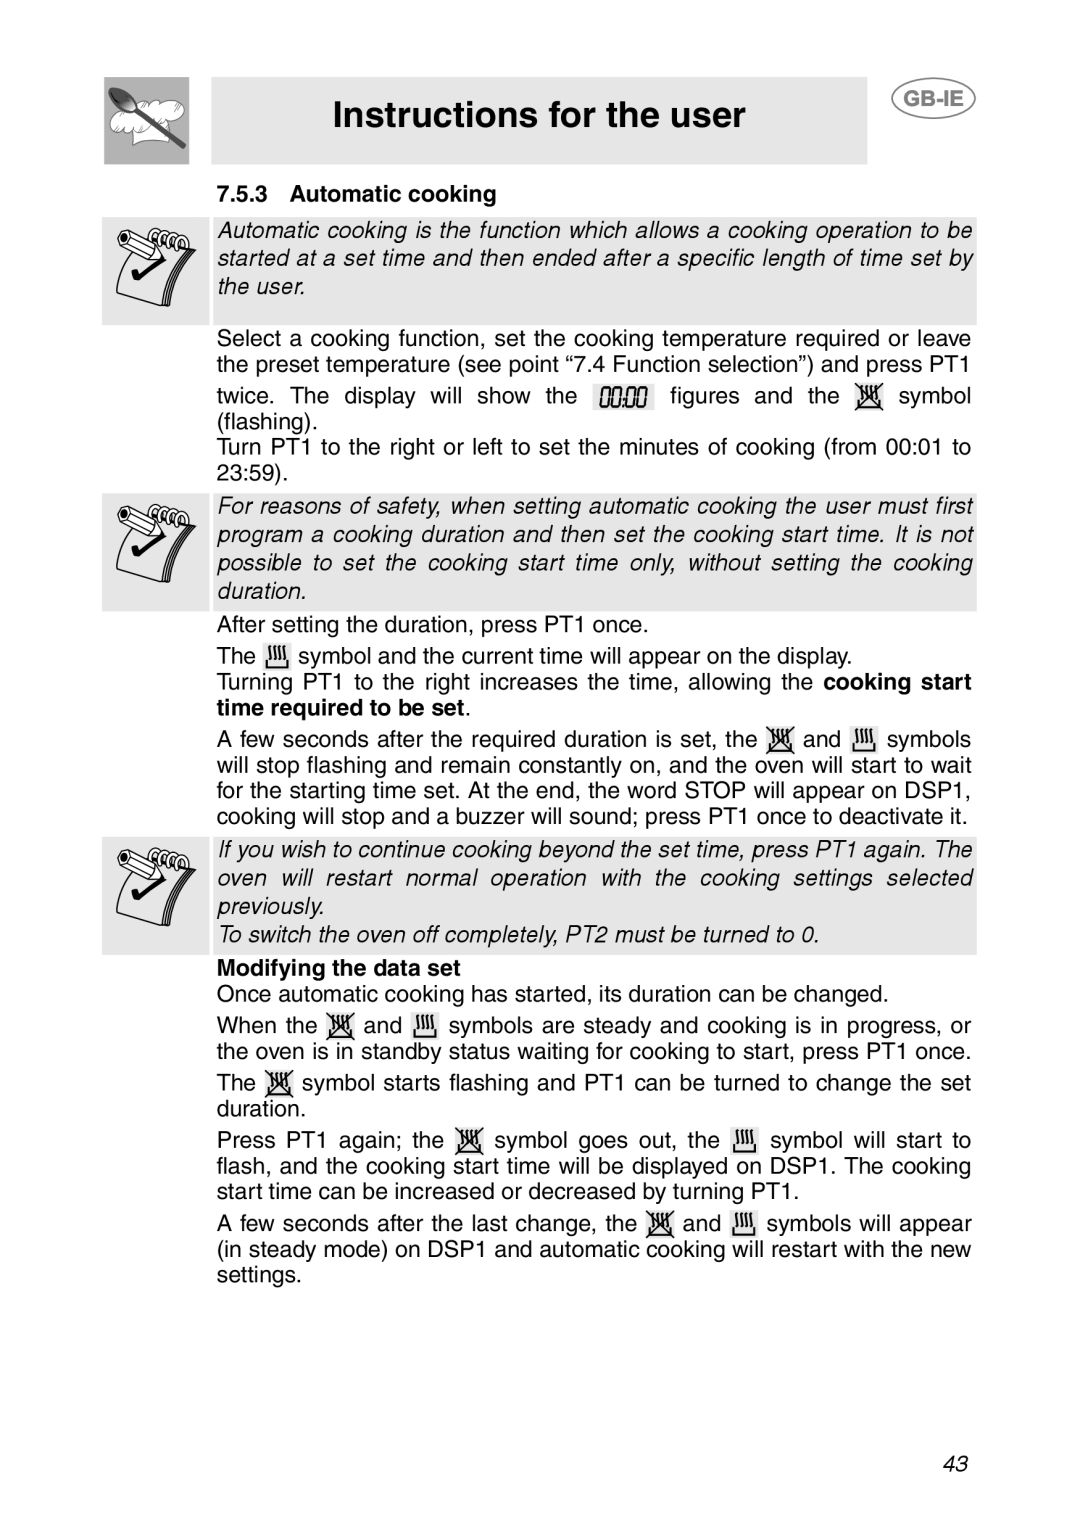 Smeg FP131B1 manual Instructions for the user, Automatic cooking, time required to be set, Modifying the data set 